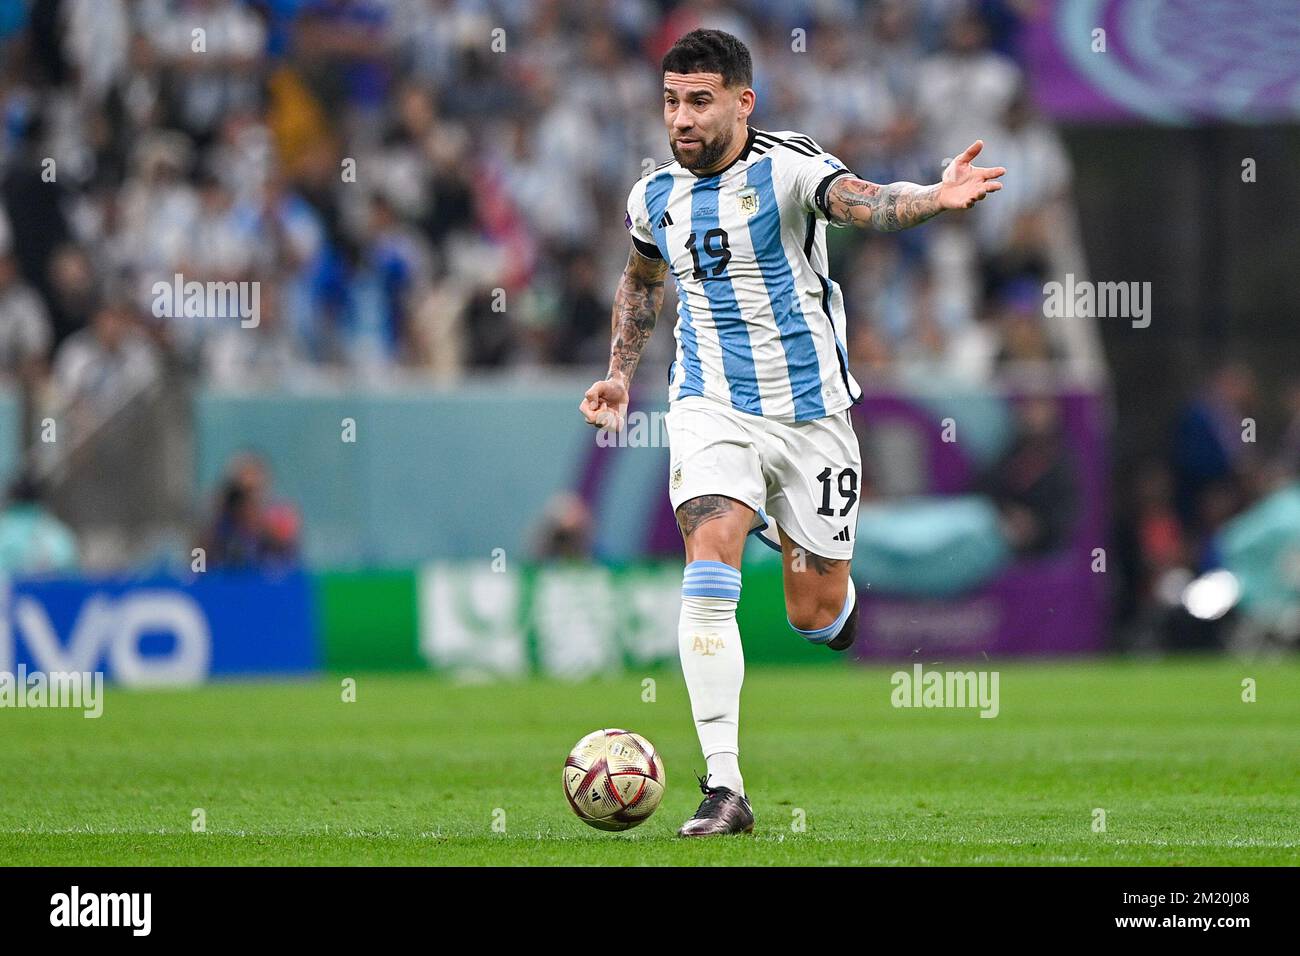 LUSAIL CITY, QATAR - DECEMBER 13: Nicolas Otamendi of Argentina runs with the ball during the Semi Final - FIFA World Cup Qatar 2022 match between Argentina and Croatia at the Lusail Stadium on December 13, 2022 in Lusail City, Qatar (Photo by Pablo Morano/BSR Agency) Stock Photo